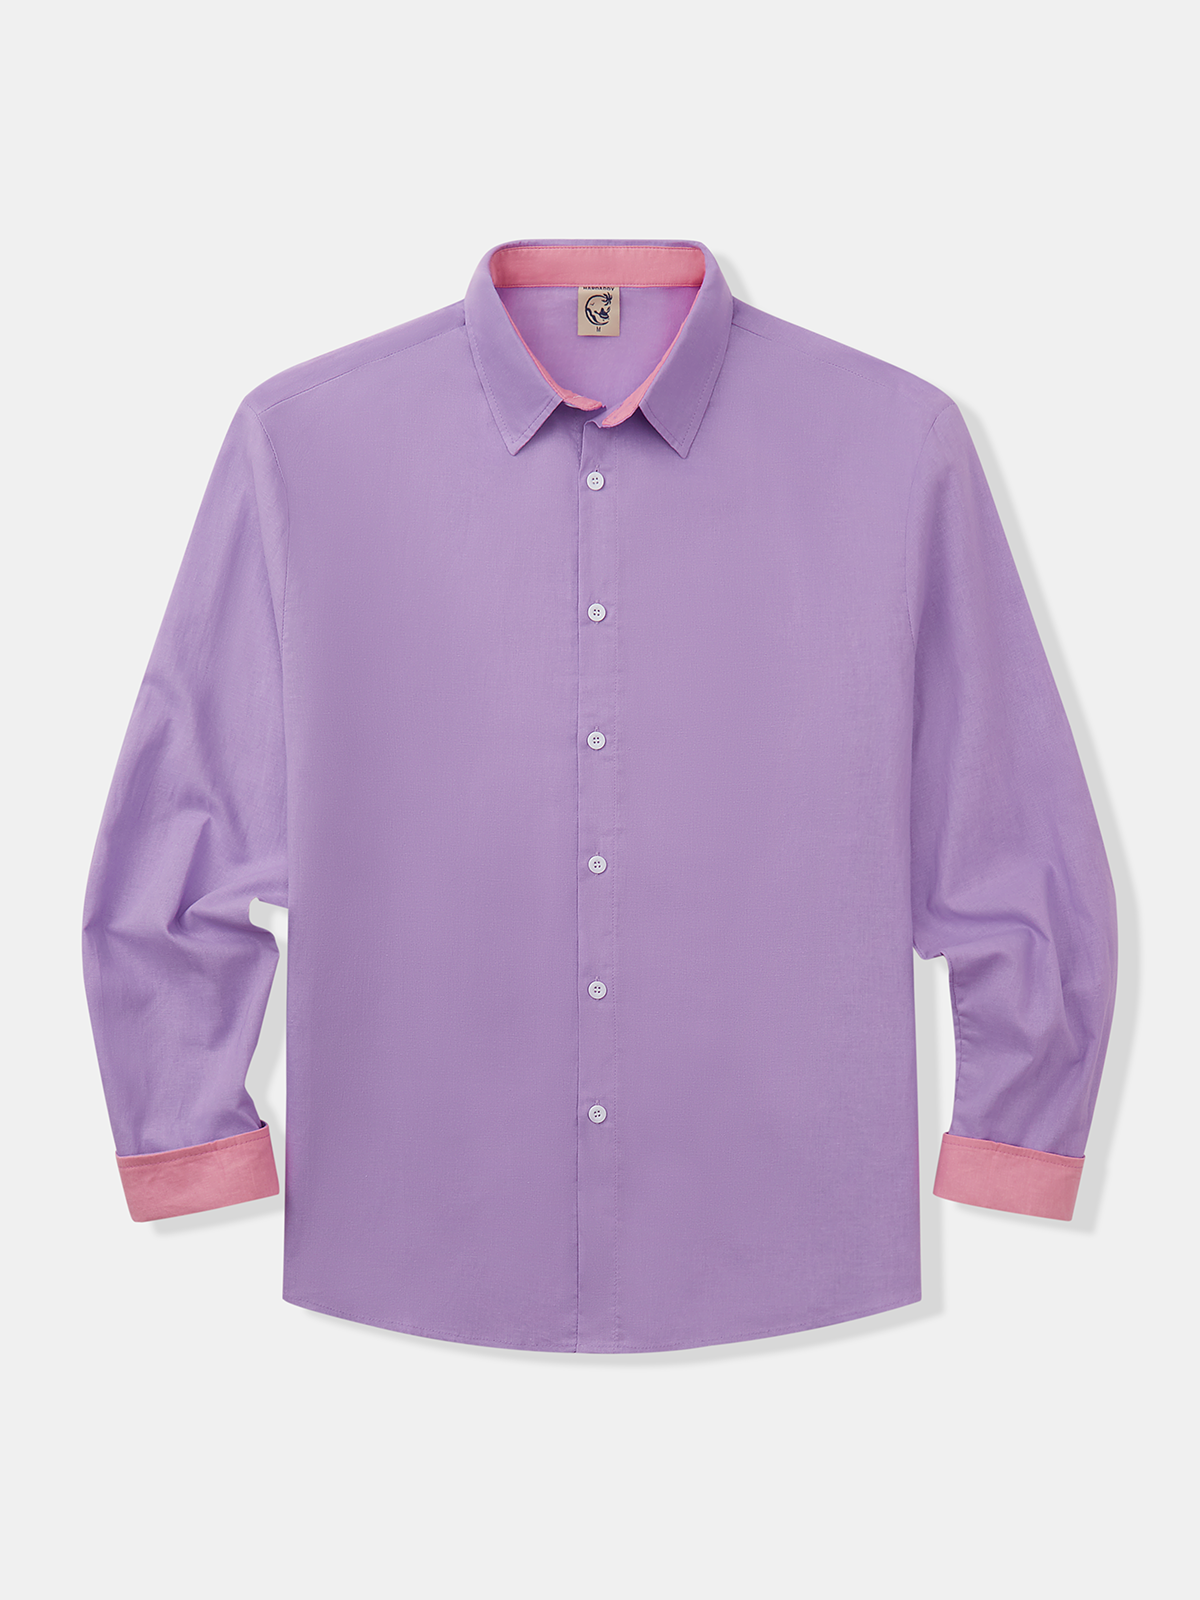 Hardaddy Cotton Contrast Color Long Sleeve Casual Shirt